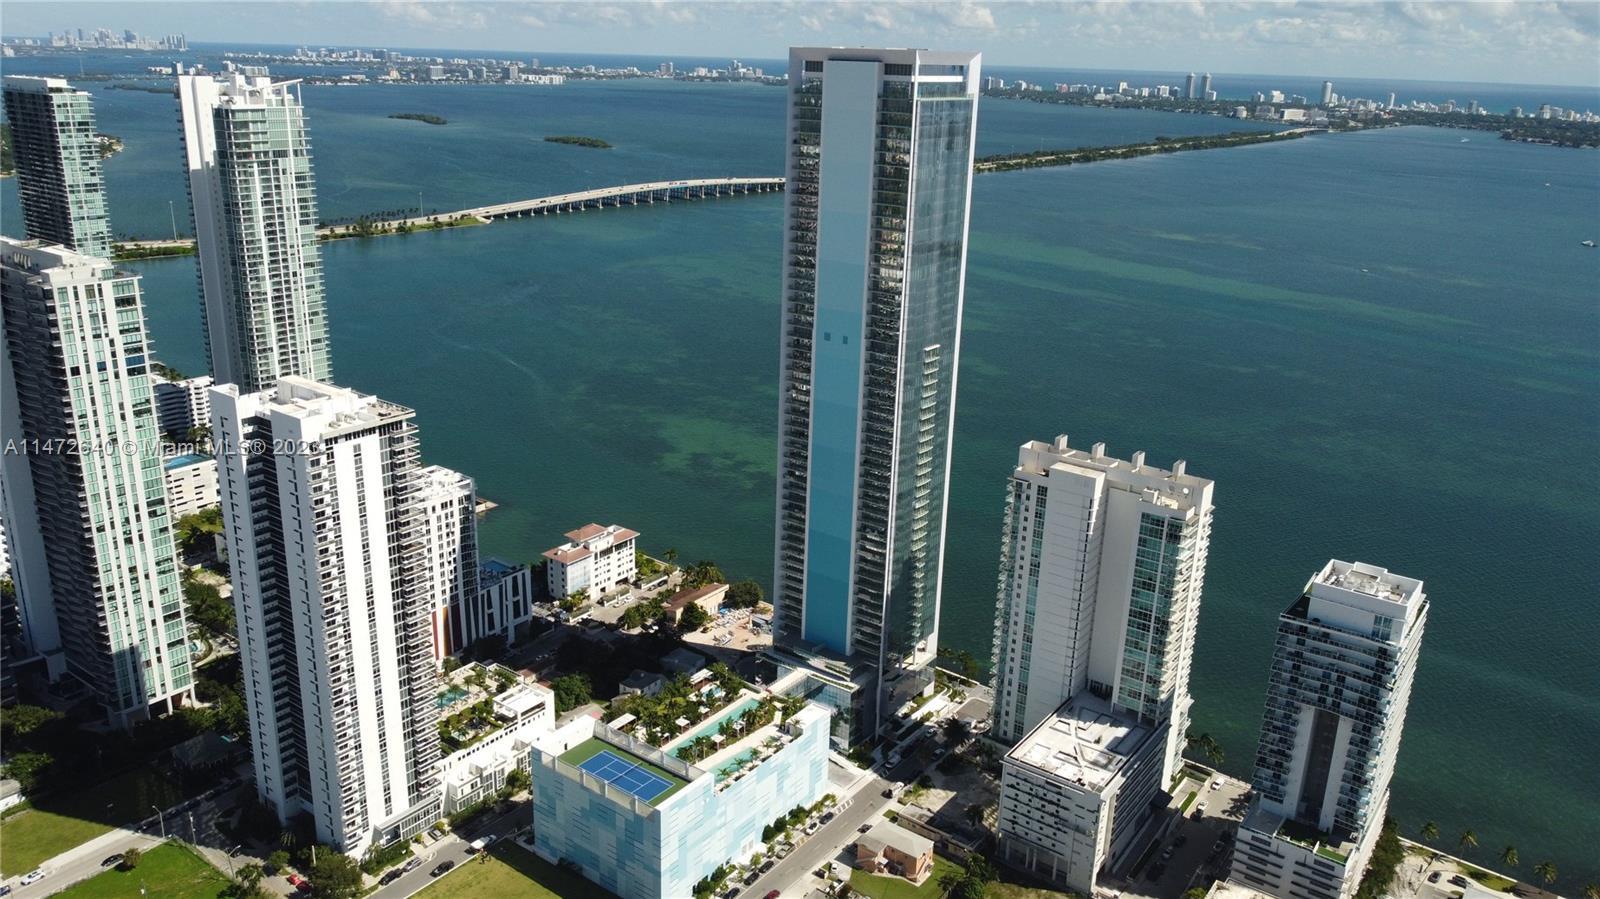 Luxury 2 Bedroom / 2 Bathroom Apartment in the heart of Miami, with a breathtaking 180-degree view t